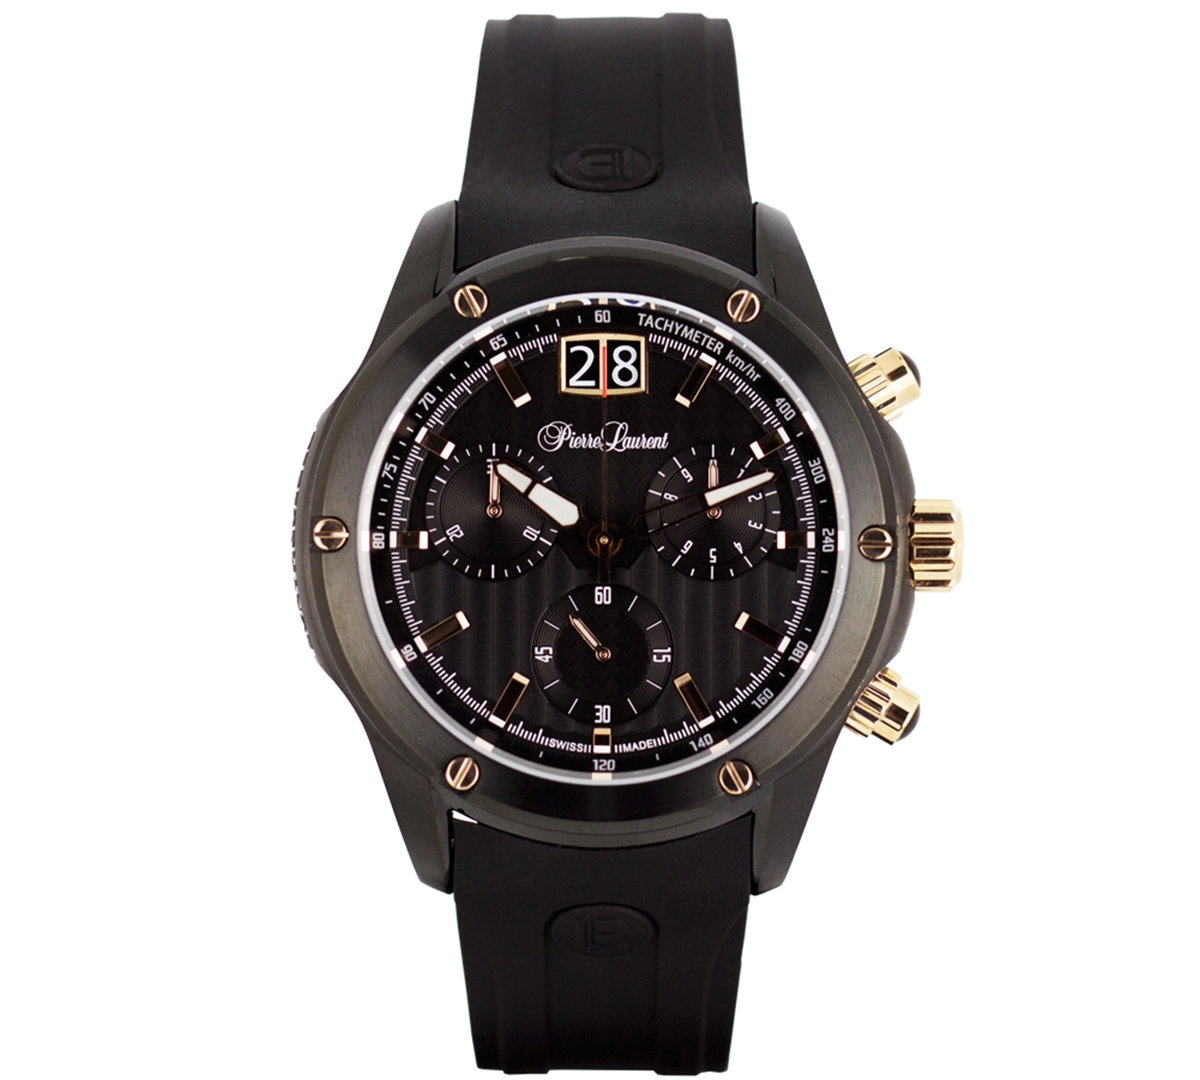 Men's Performance Swiss Chronograph Rubber Strap Watch 45mm - Black Pvd Over Stainless Steel